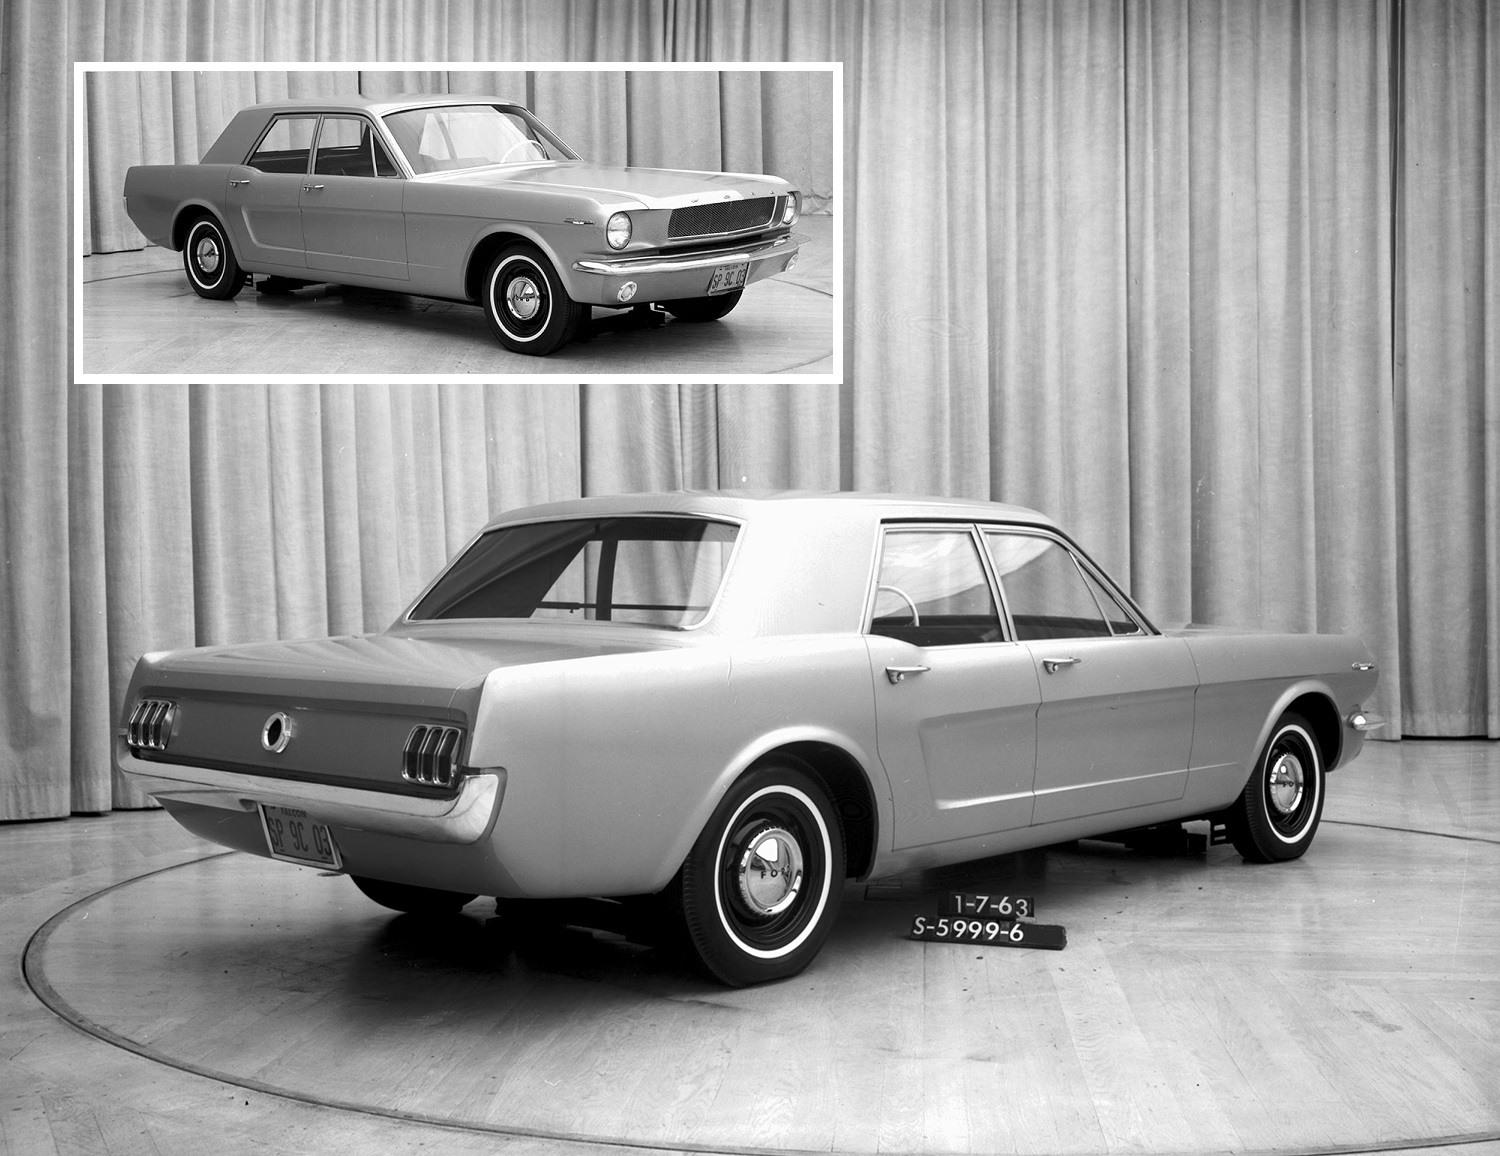 Classic Ford Mustang Prototypes With Four-Doors